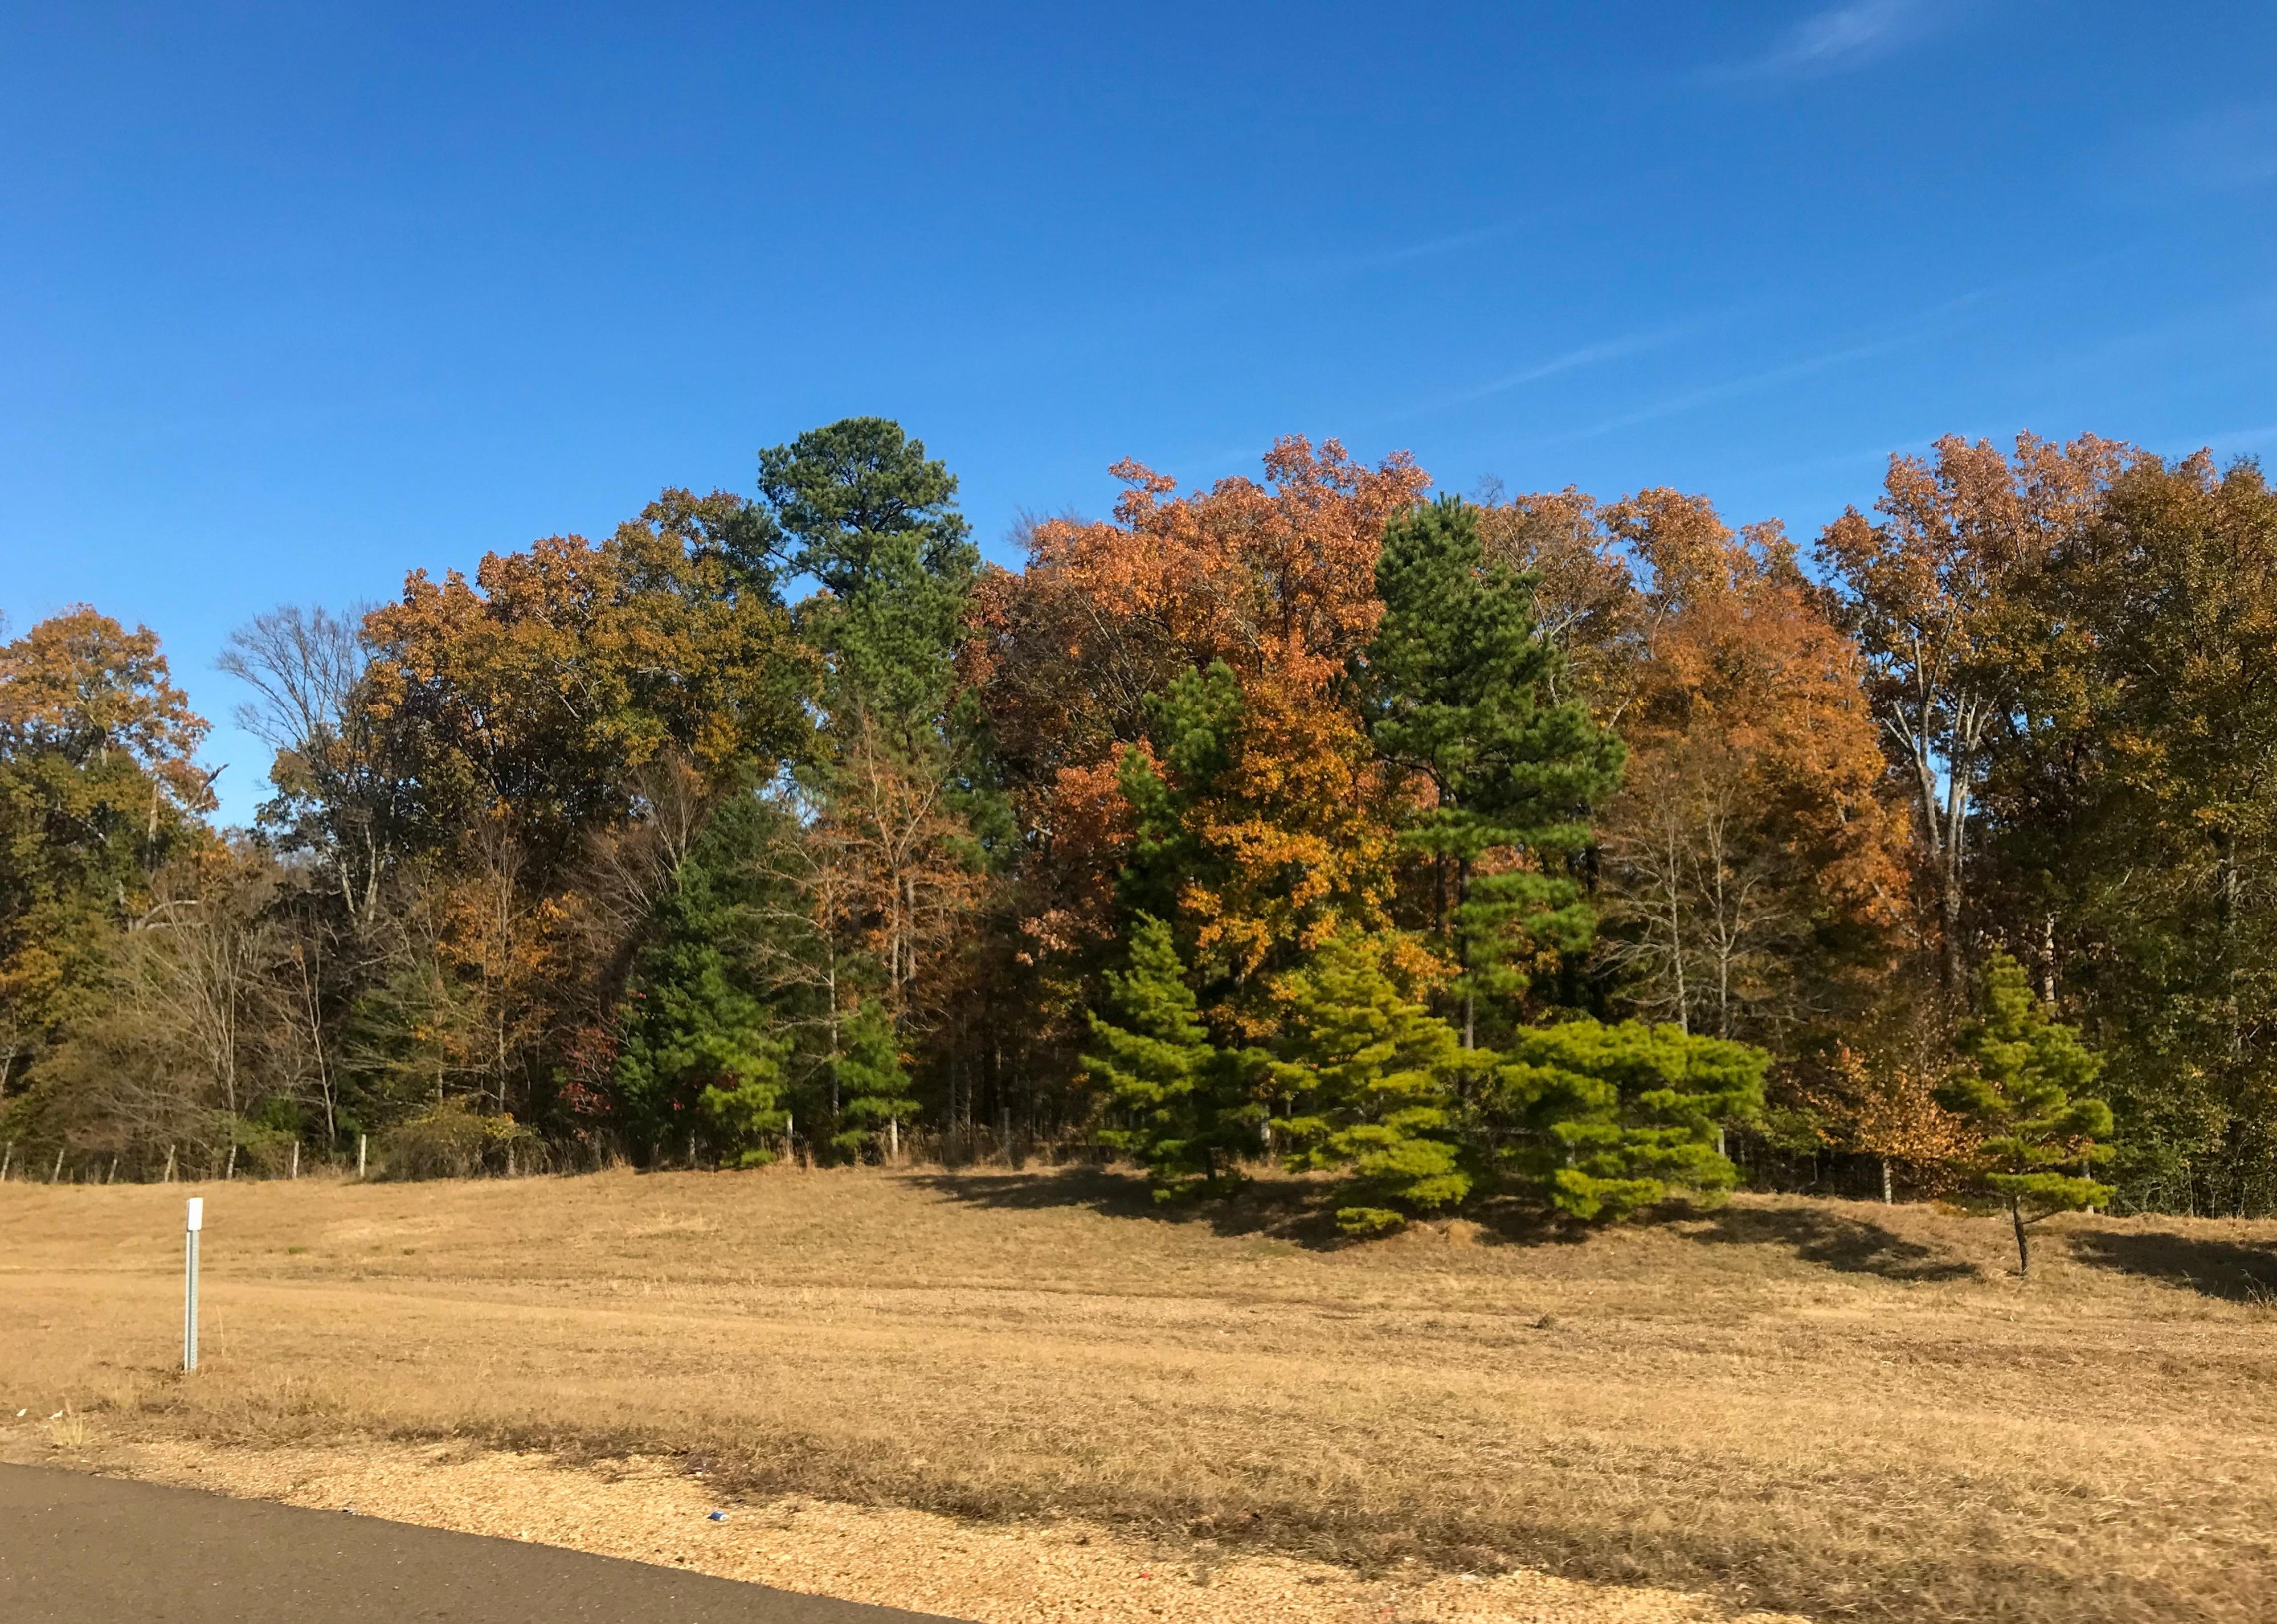 <p>- Population: 27,459<br> - Location: Suburb of Jackson, MS<br> - National rank: 176</p>  <p>Simmons Arboretum, Liberty Park, and <a href="https://www.madisonthecity.com/parks-sites">Strawberry Patch Park</a> are popular recreation sites in Madison. Although there are no college campuses, <a href="https://www.jsums.edu/lifelearning/?page_id=738">Jackson State University</a> offers satellite courses in town.</p>